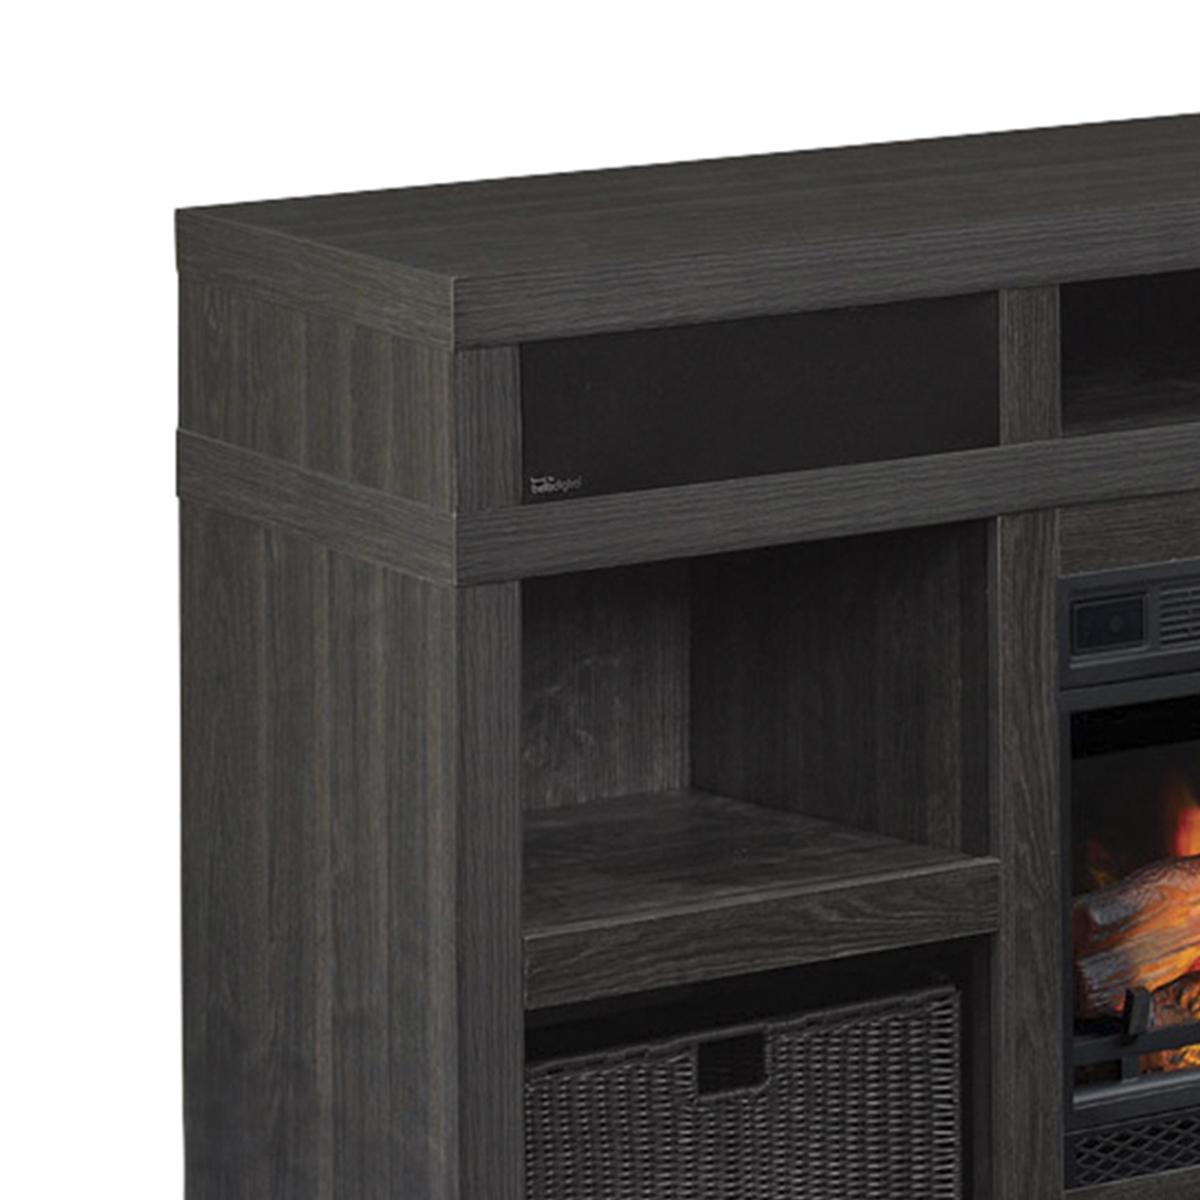 Fireplace Candle Insert Lovely Fabio Flames Greatlin 64" Tv Stand In Black Walnut